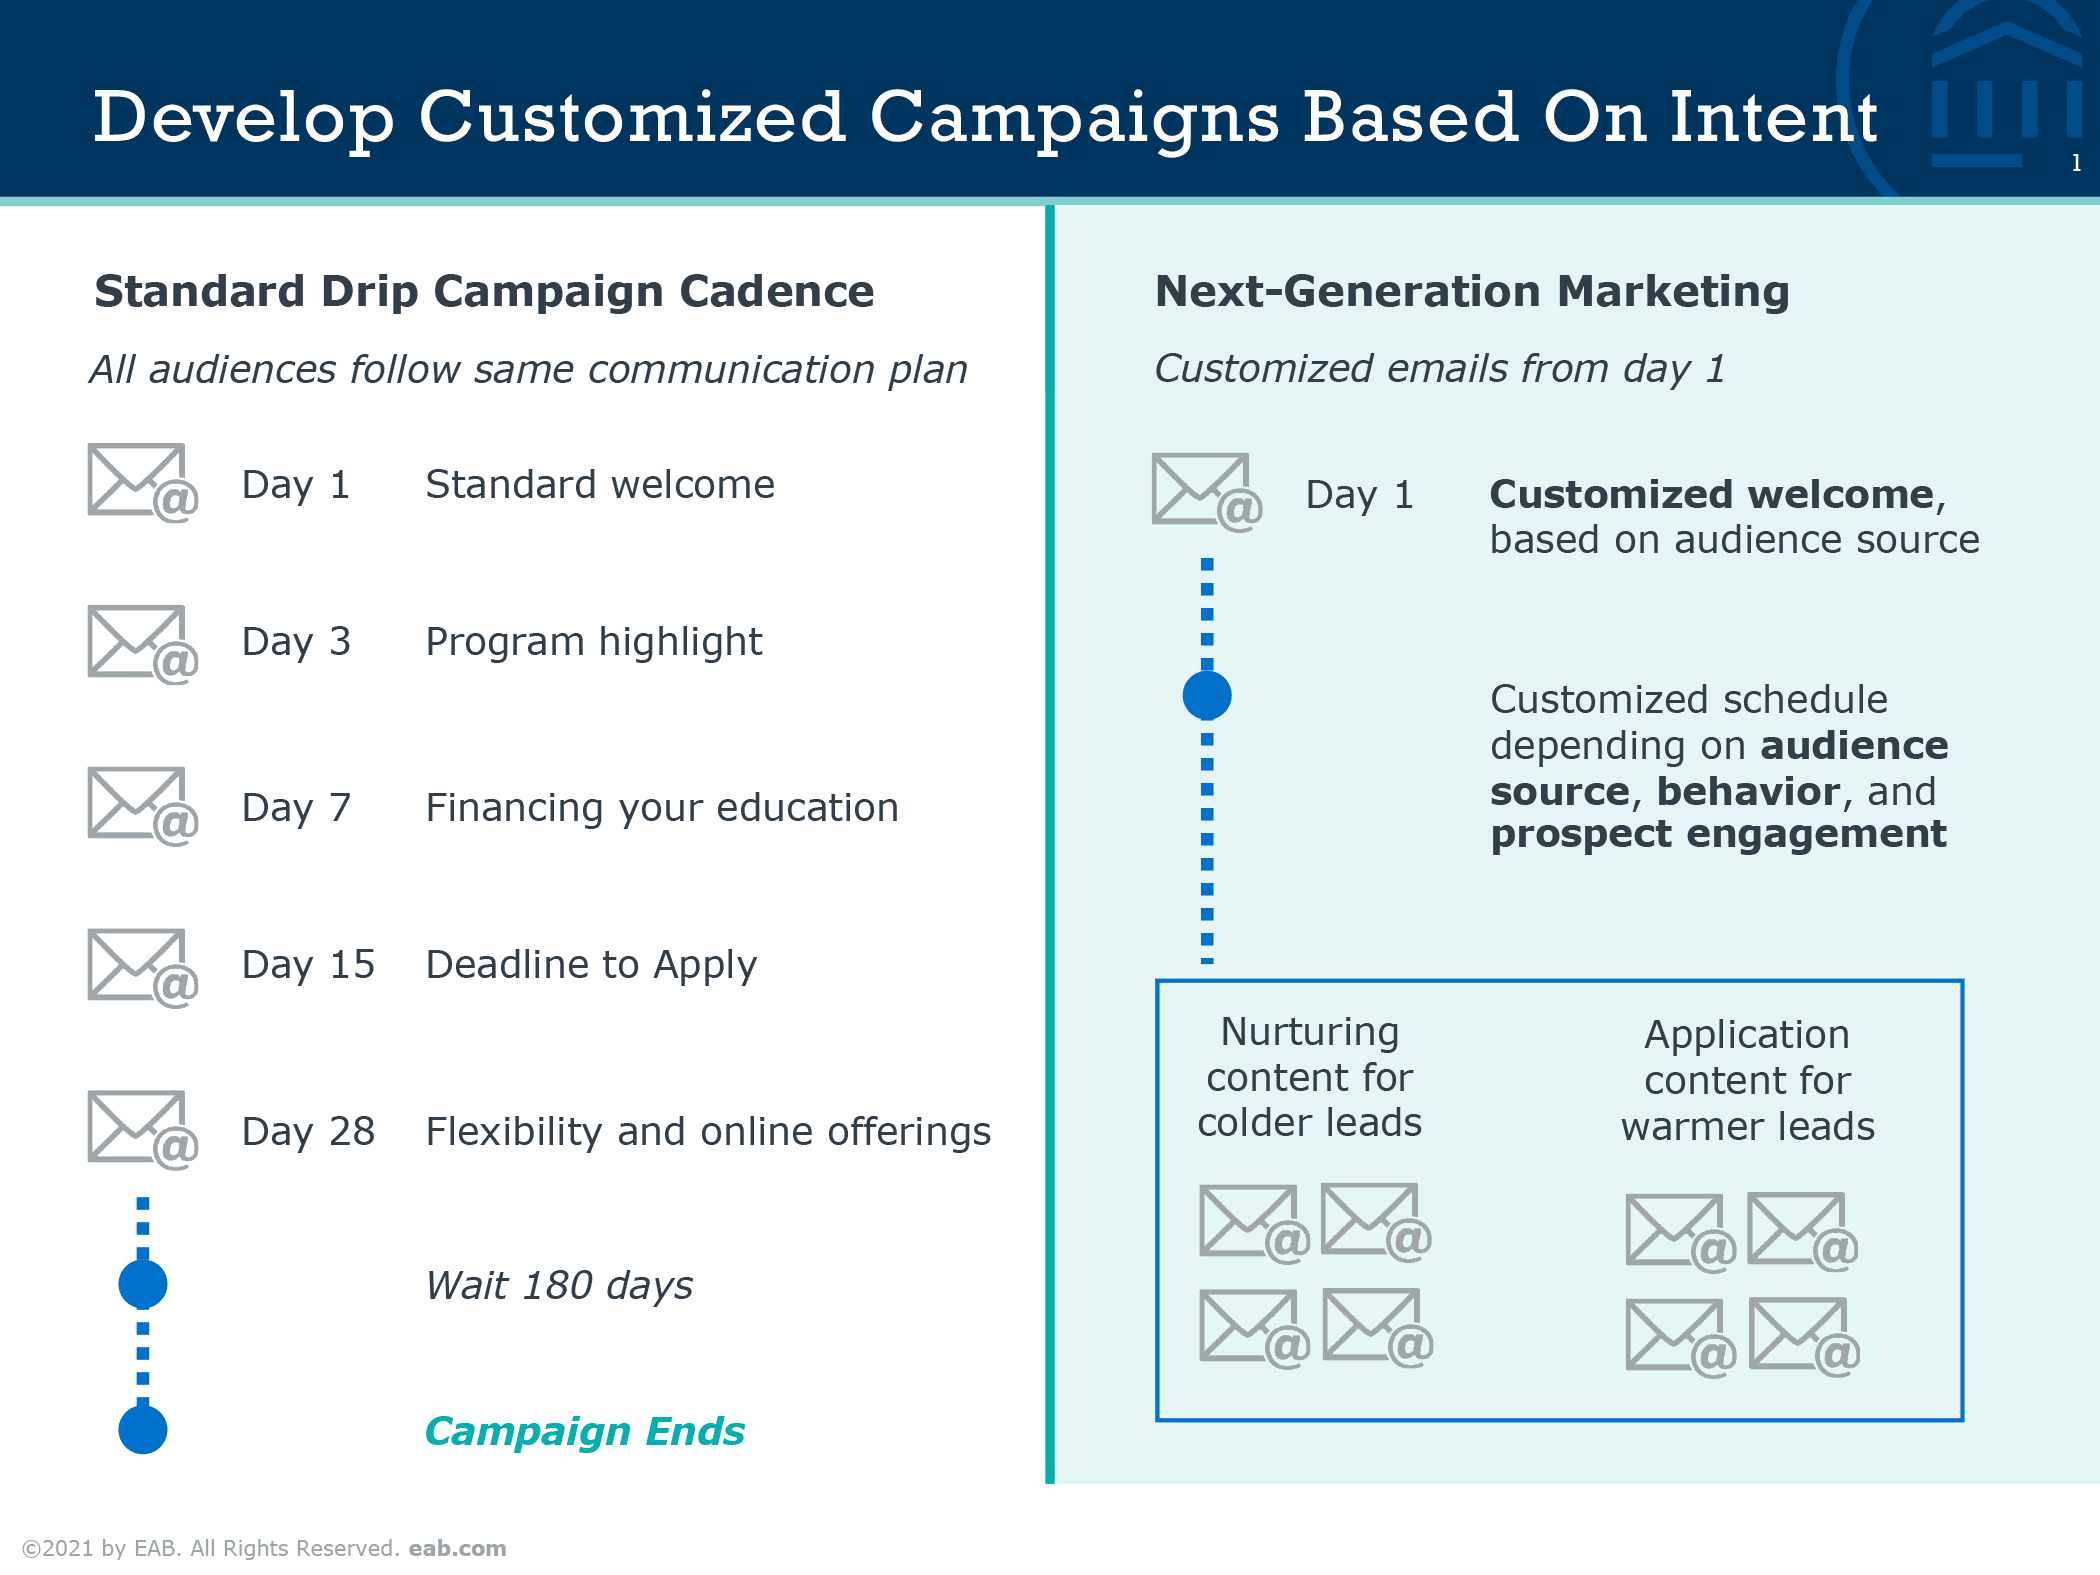 Slide showing how to develop customized drip campaigns based on intent